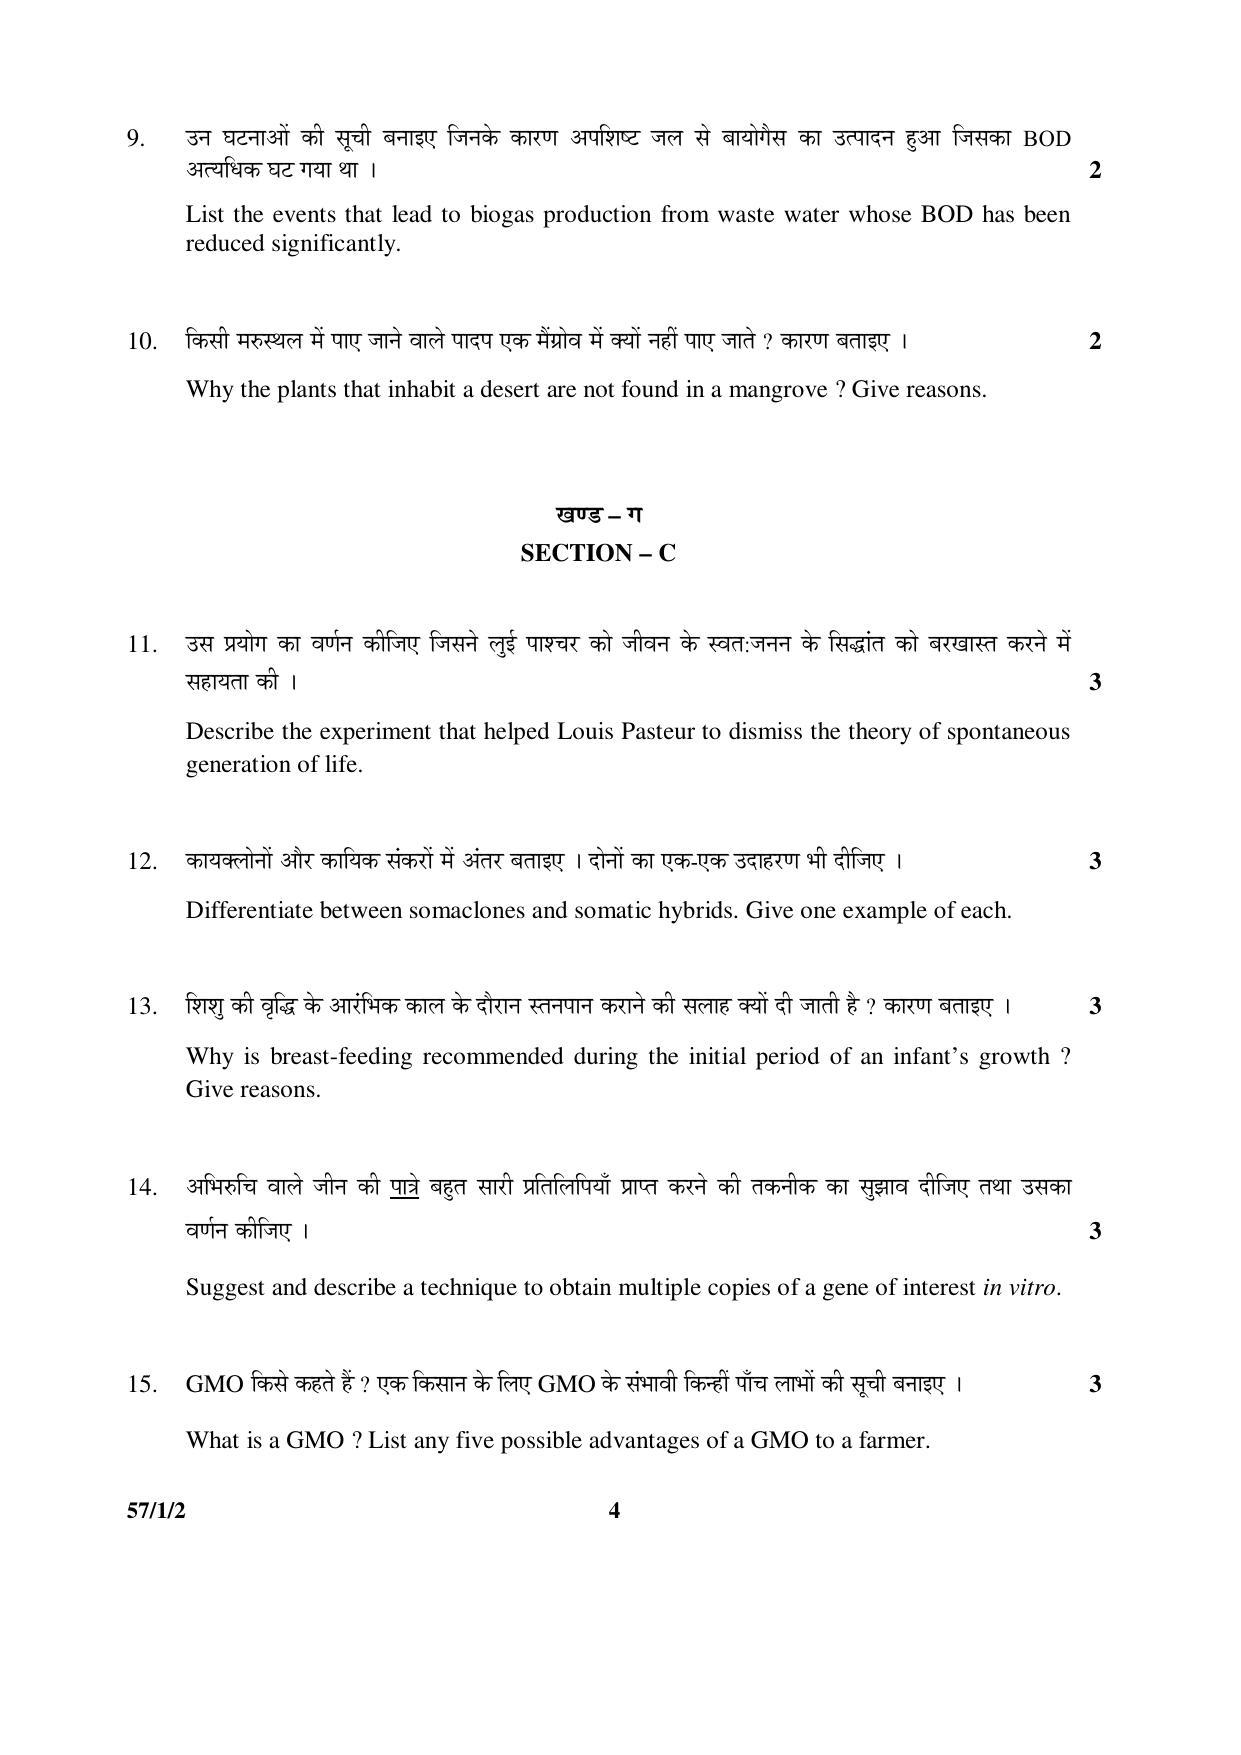 CBSE Class 12 57-1-2 BIOLOGY 2016 Question Paper - Page 4